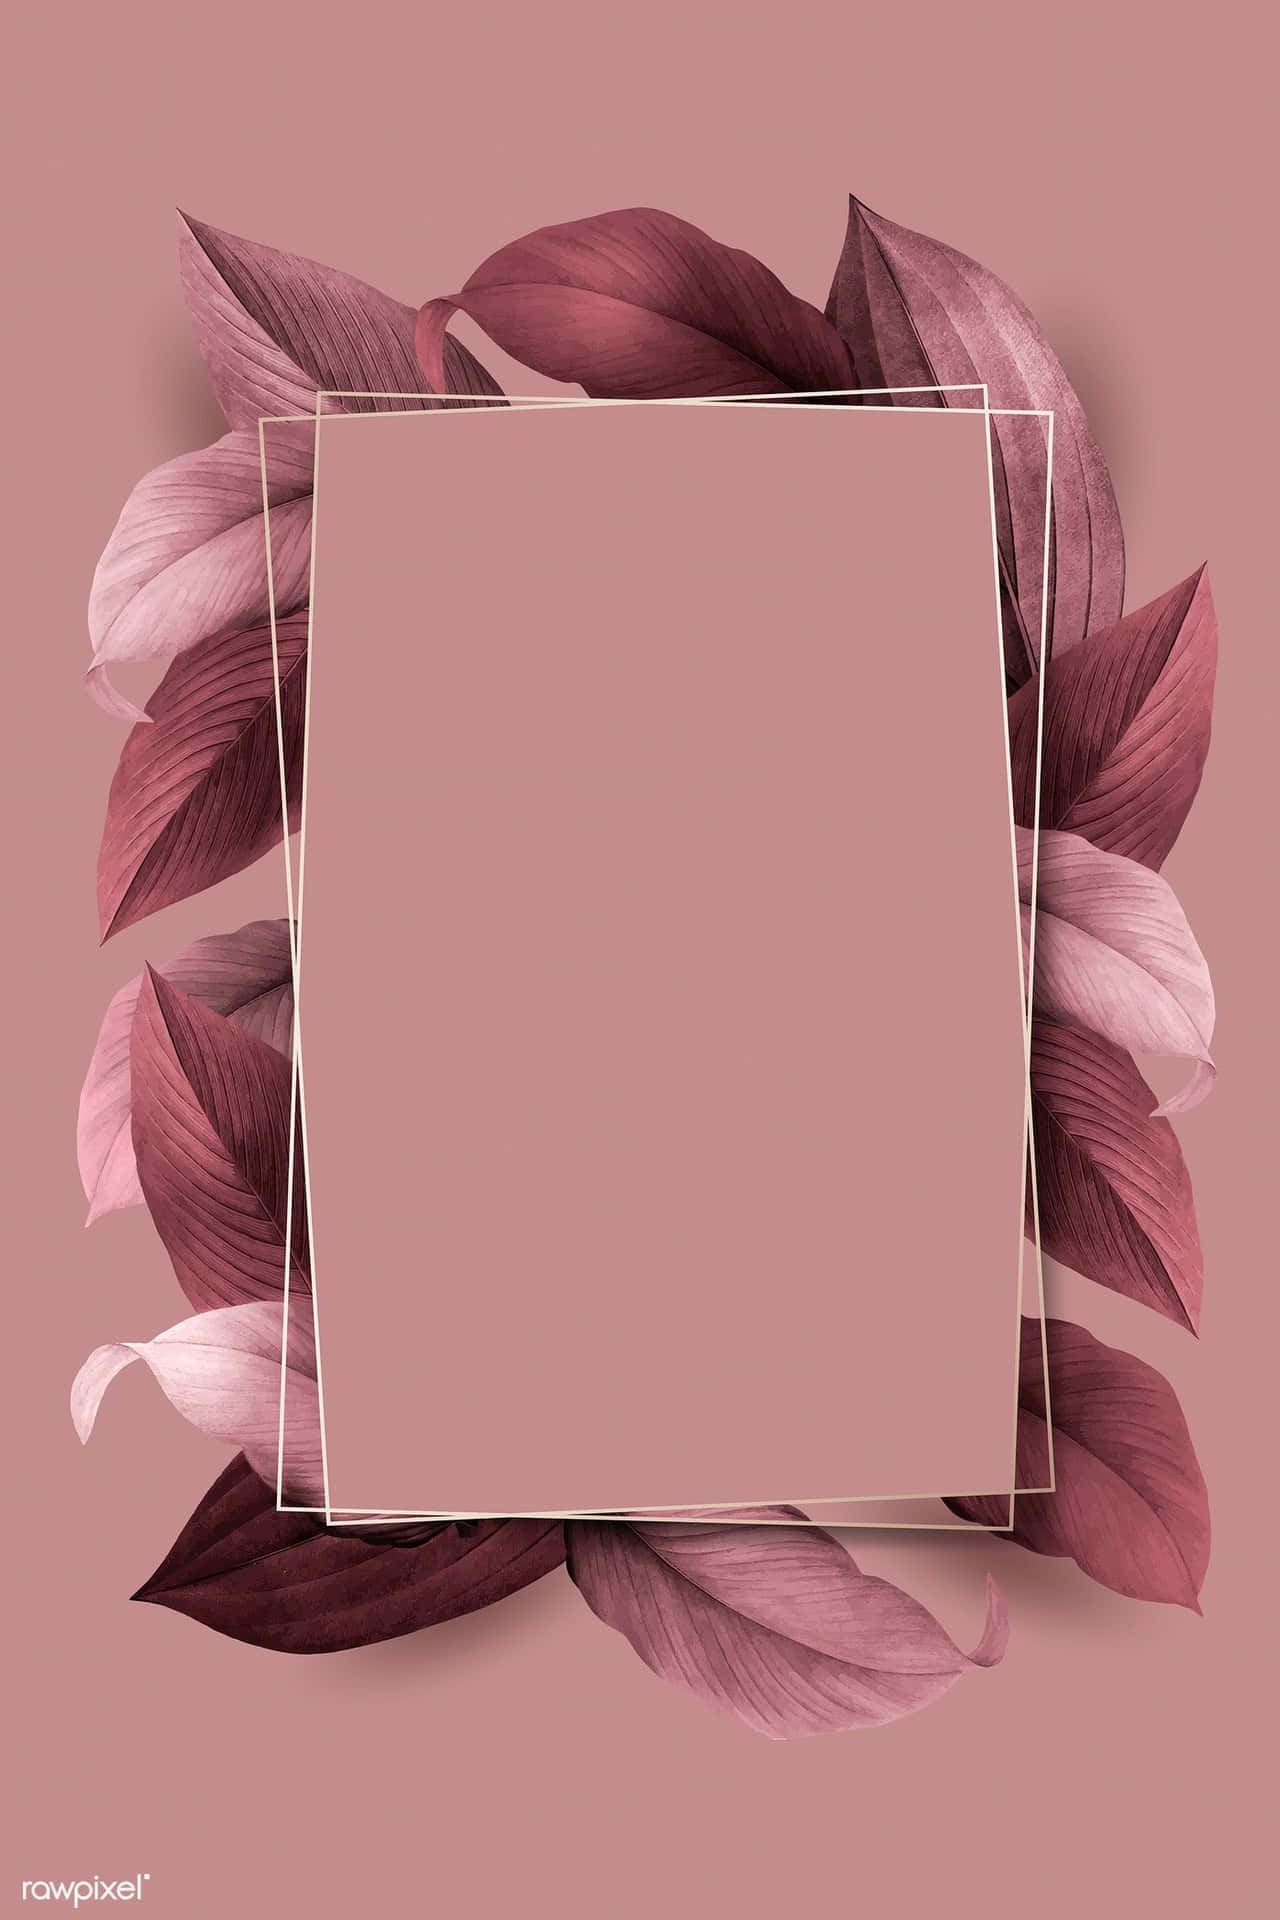 A Pink Frame With Leaves On A Pink Background